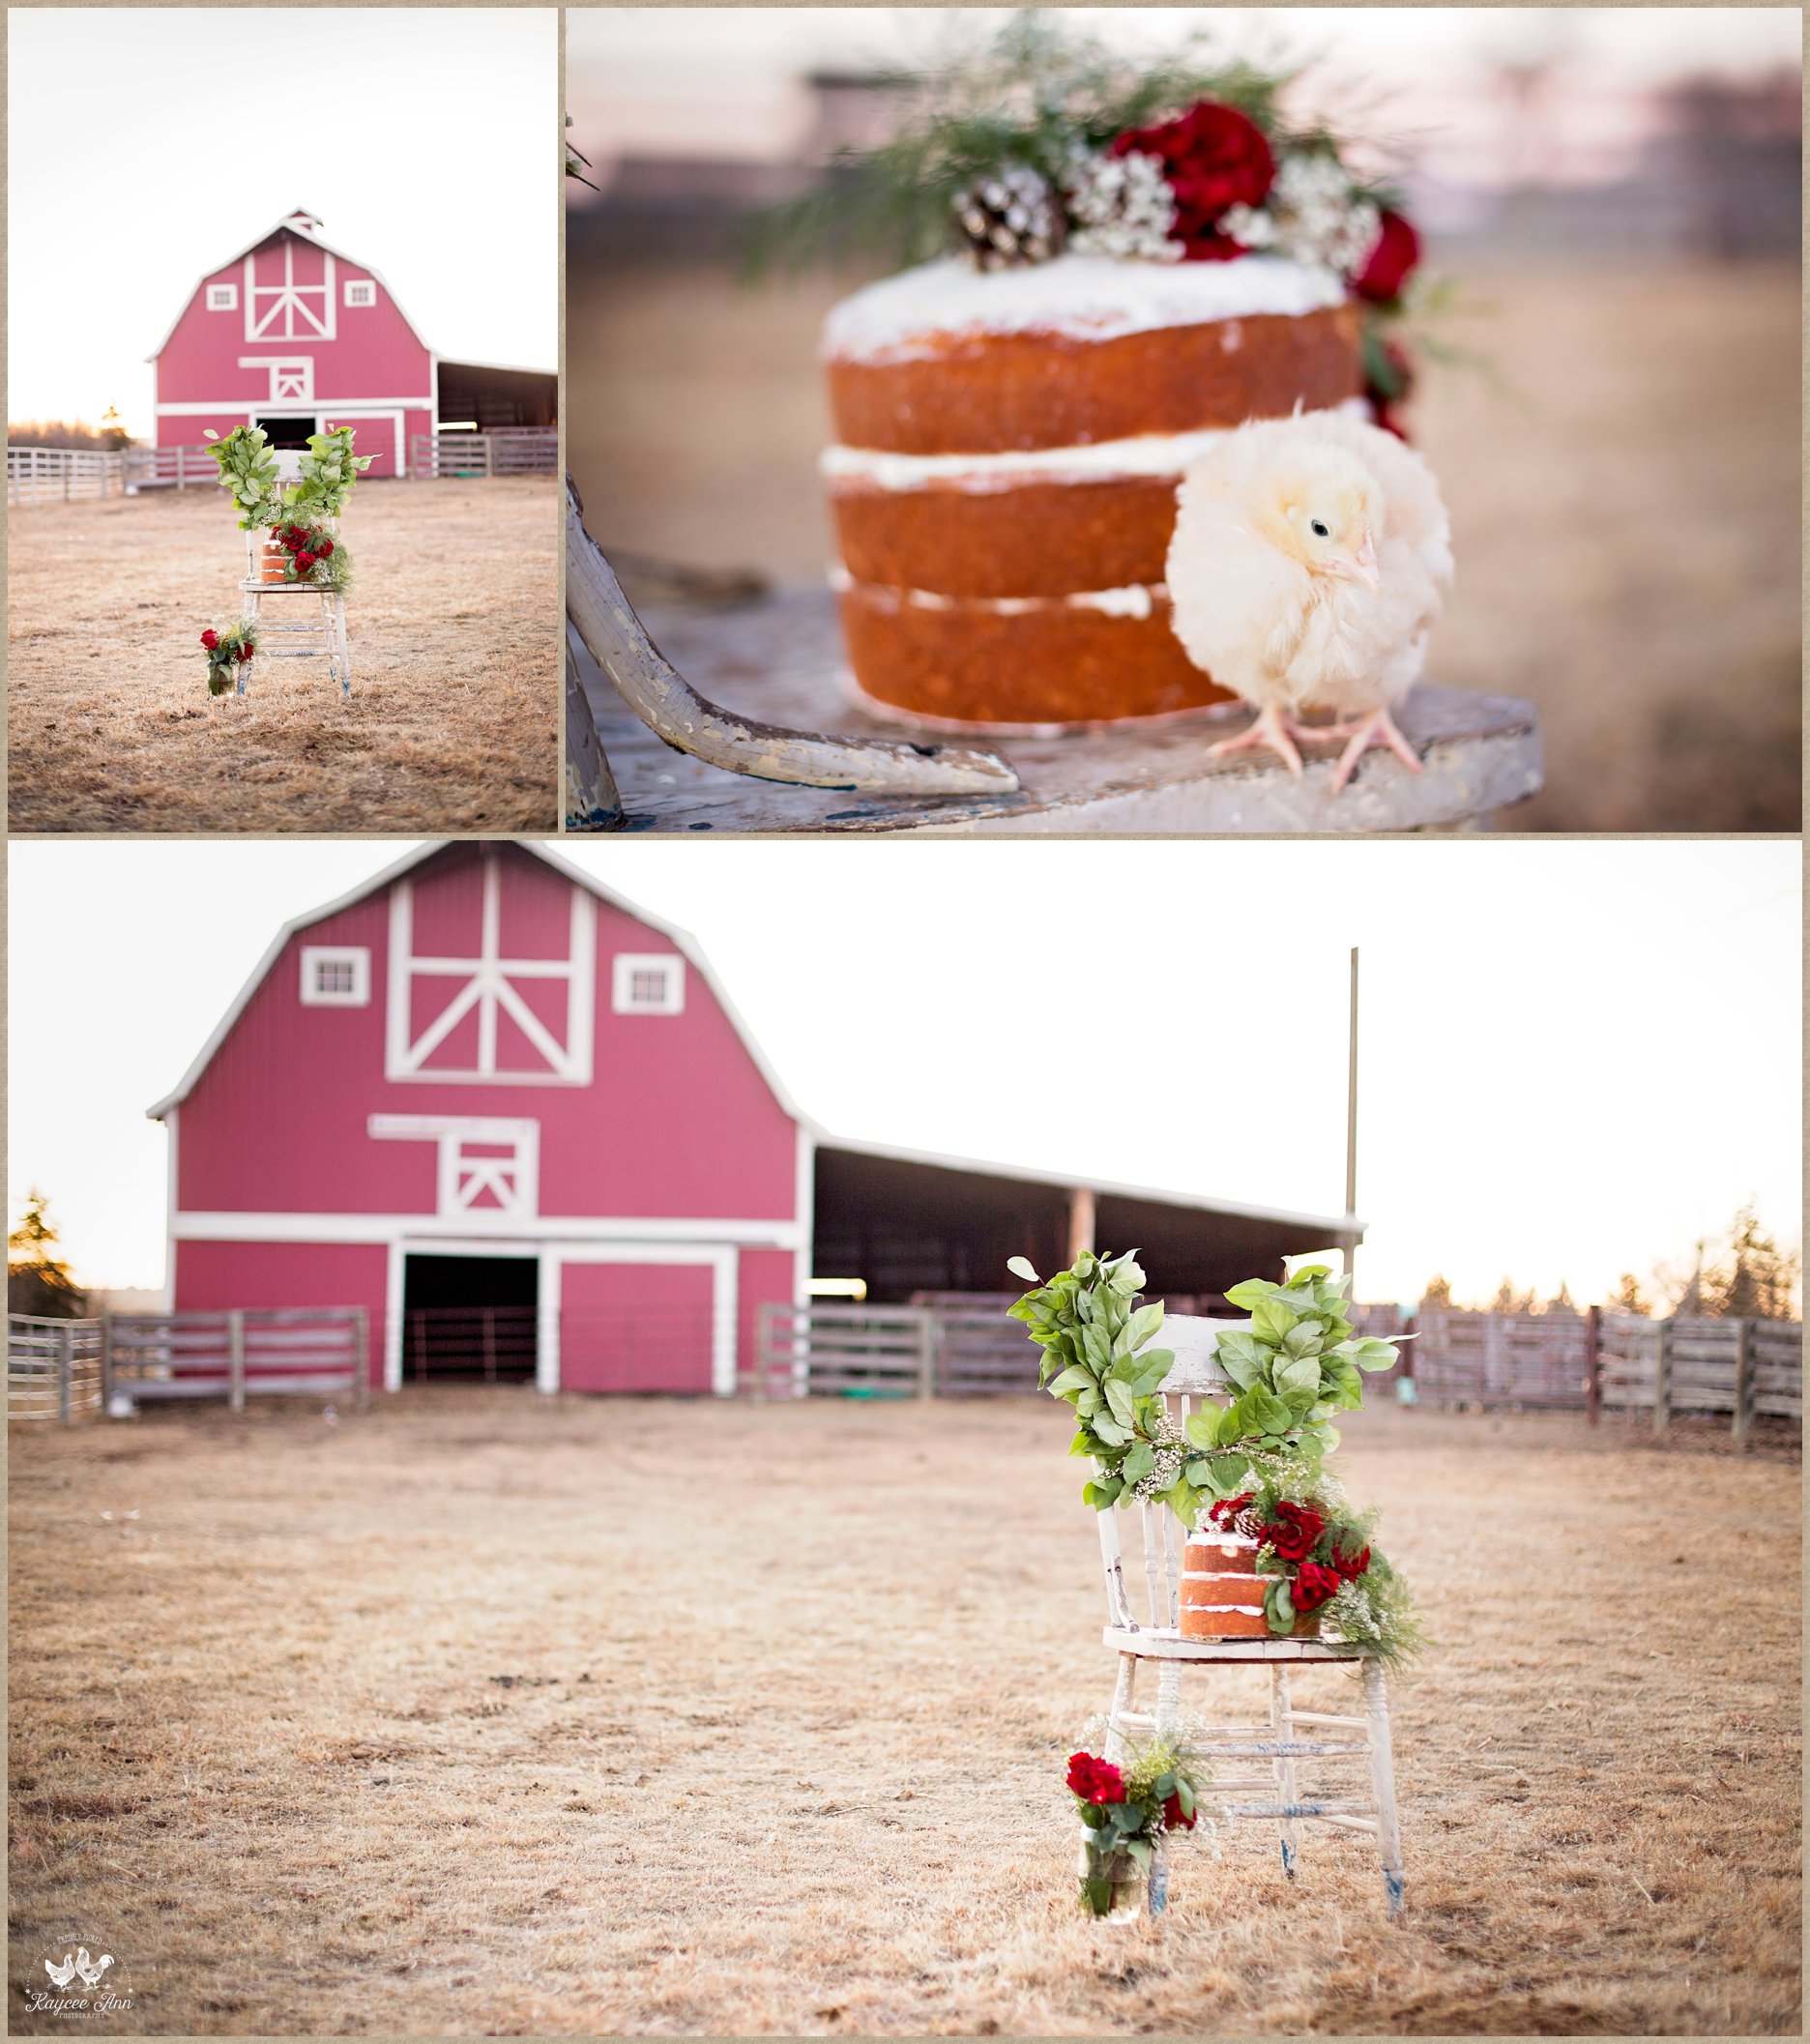 naked rustic cake airdrie